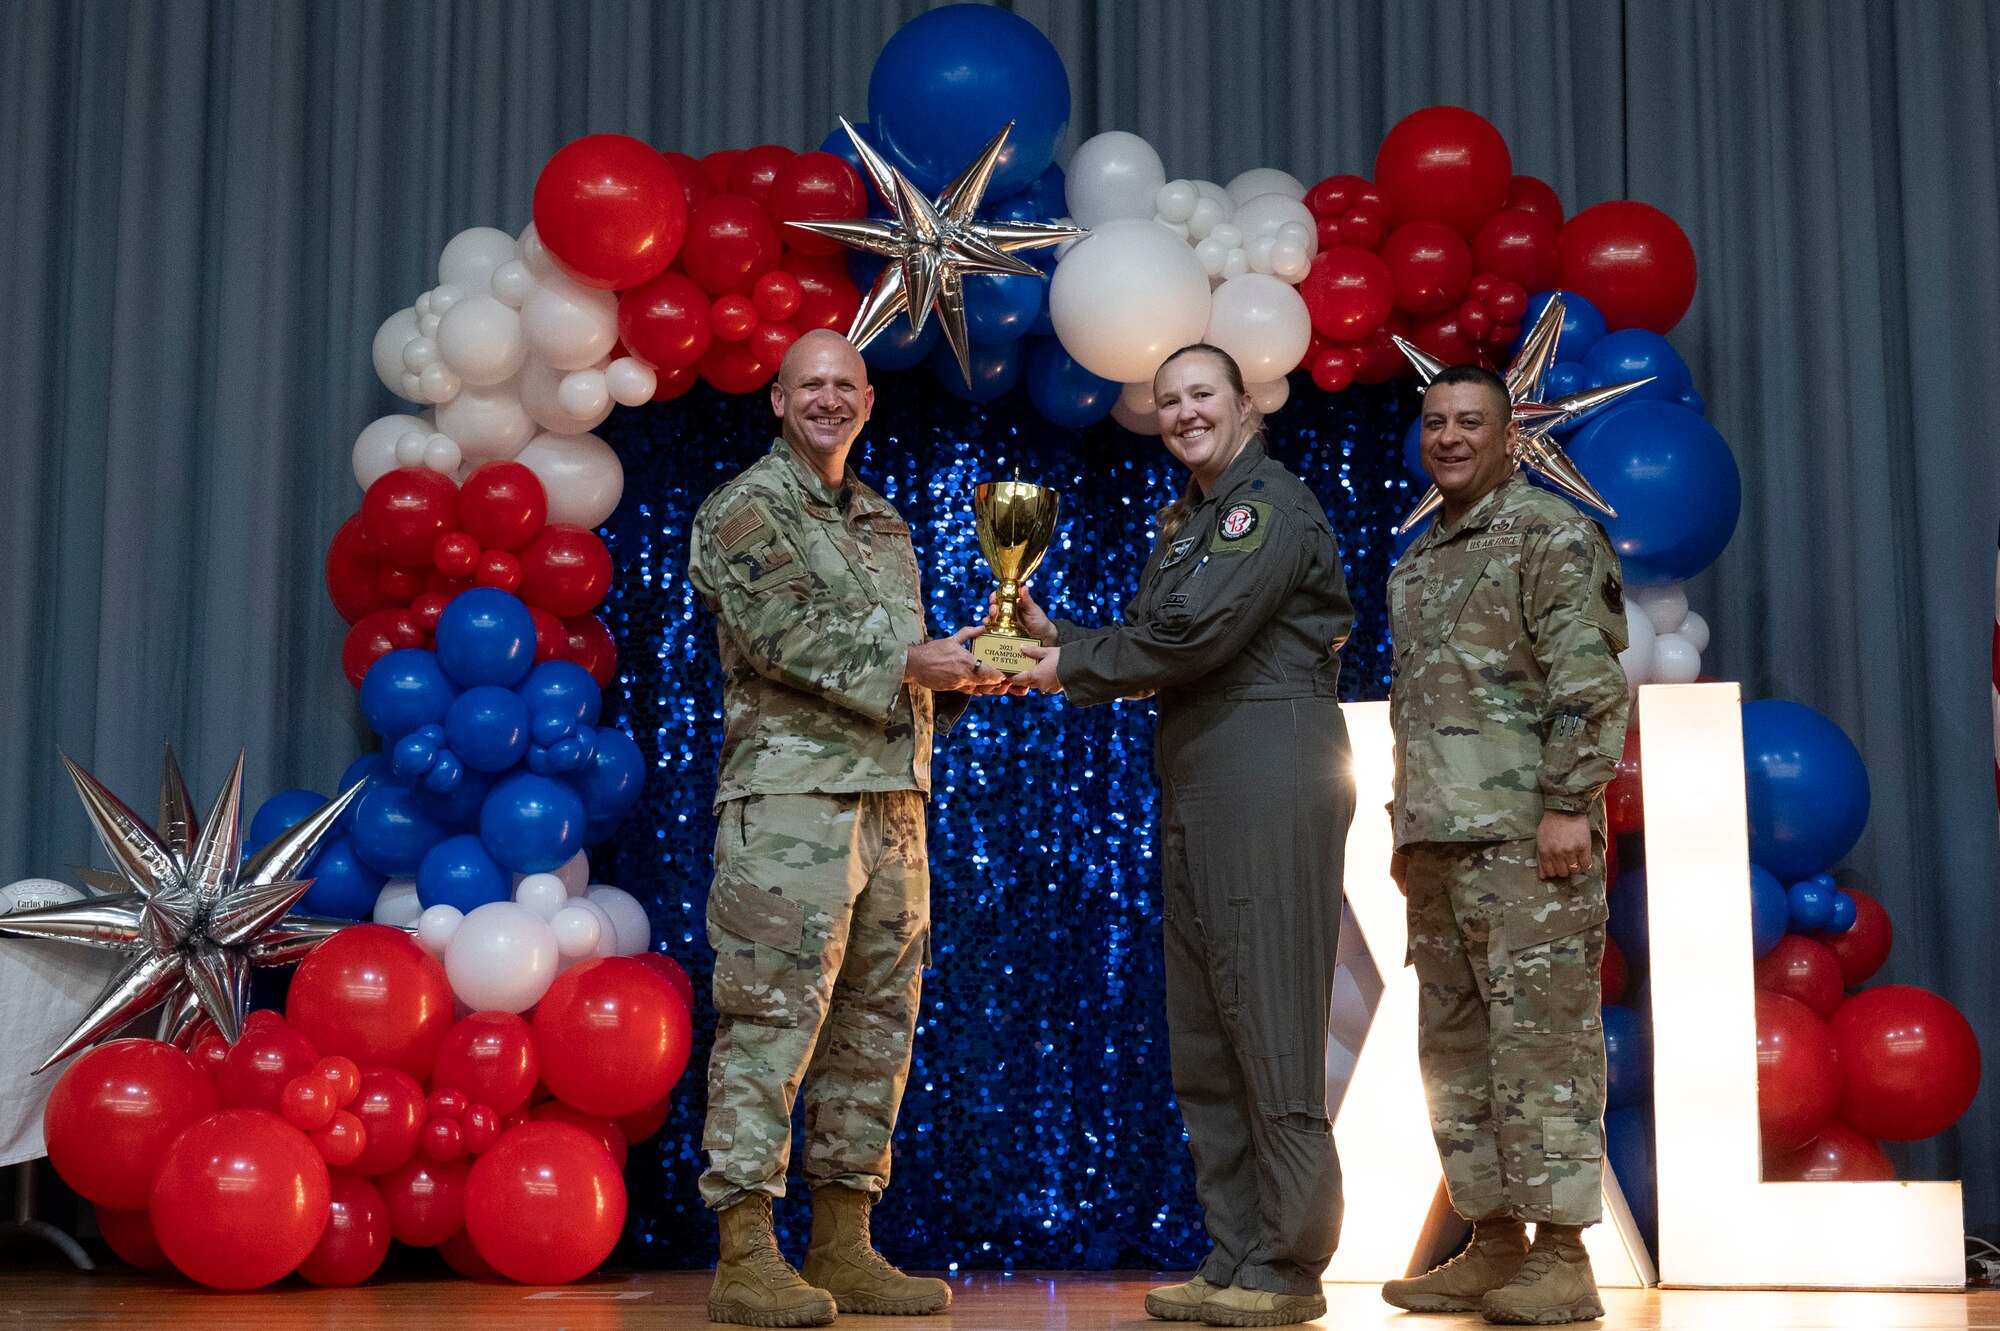 U.S. Air Force Col. Kevin Davidson, 47th Flying Training Wing (FTW) commander, and Chief Master Sgt. Lester Largaespada, 47th FTW command chief, present Lt. Col. Elizabeth Music, 47th Student Squadron commander, the 2023 Intramural Commander’s Trophy during the 2023 47th FTW Annual Awards Ceremony at Laughlin Air Force Base, Texas, Feb. 2, 2024. The annual awards recognized the top performers throughout the 47th Flying Training Wing during fiscal year 2023. (U.S. Air Force photo by Senior Airman Kailee Reynolds)